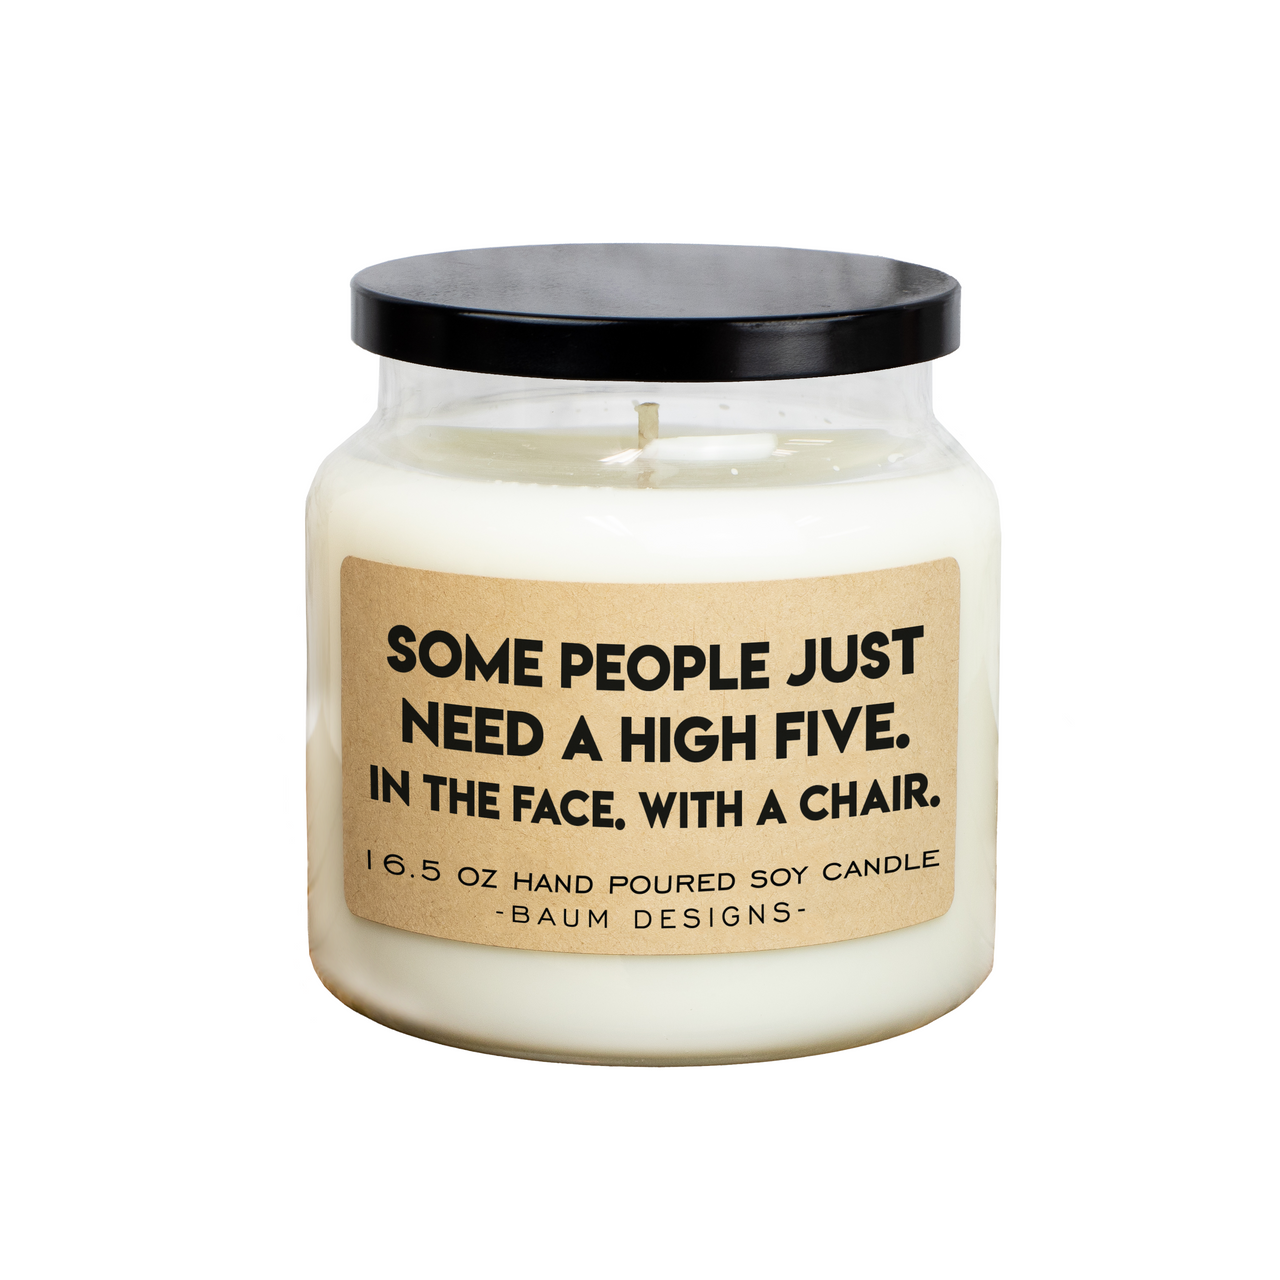 Some People Just Need A High Five in The Face With A Chair Soy Candle Baum Designs